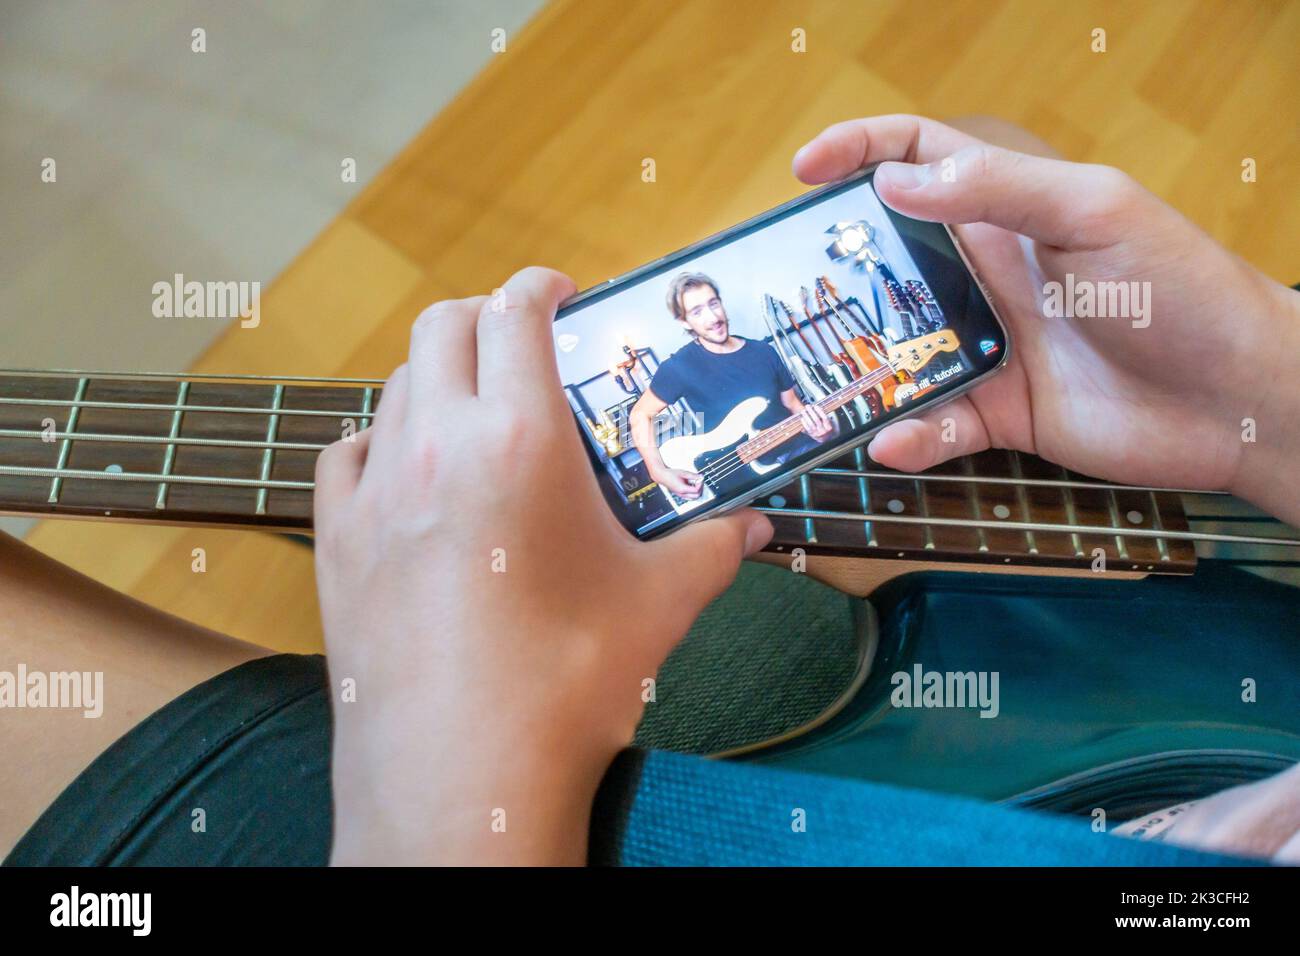 A boy self educates by watching an instructional video on a smartphone to learn how to play a tune on an electric bass guitar Stock Photo